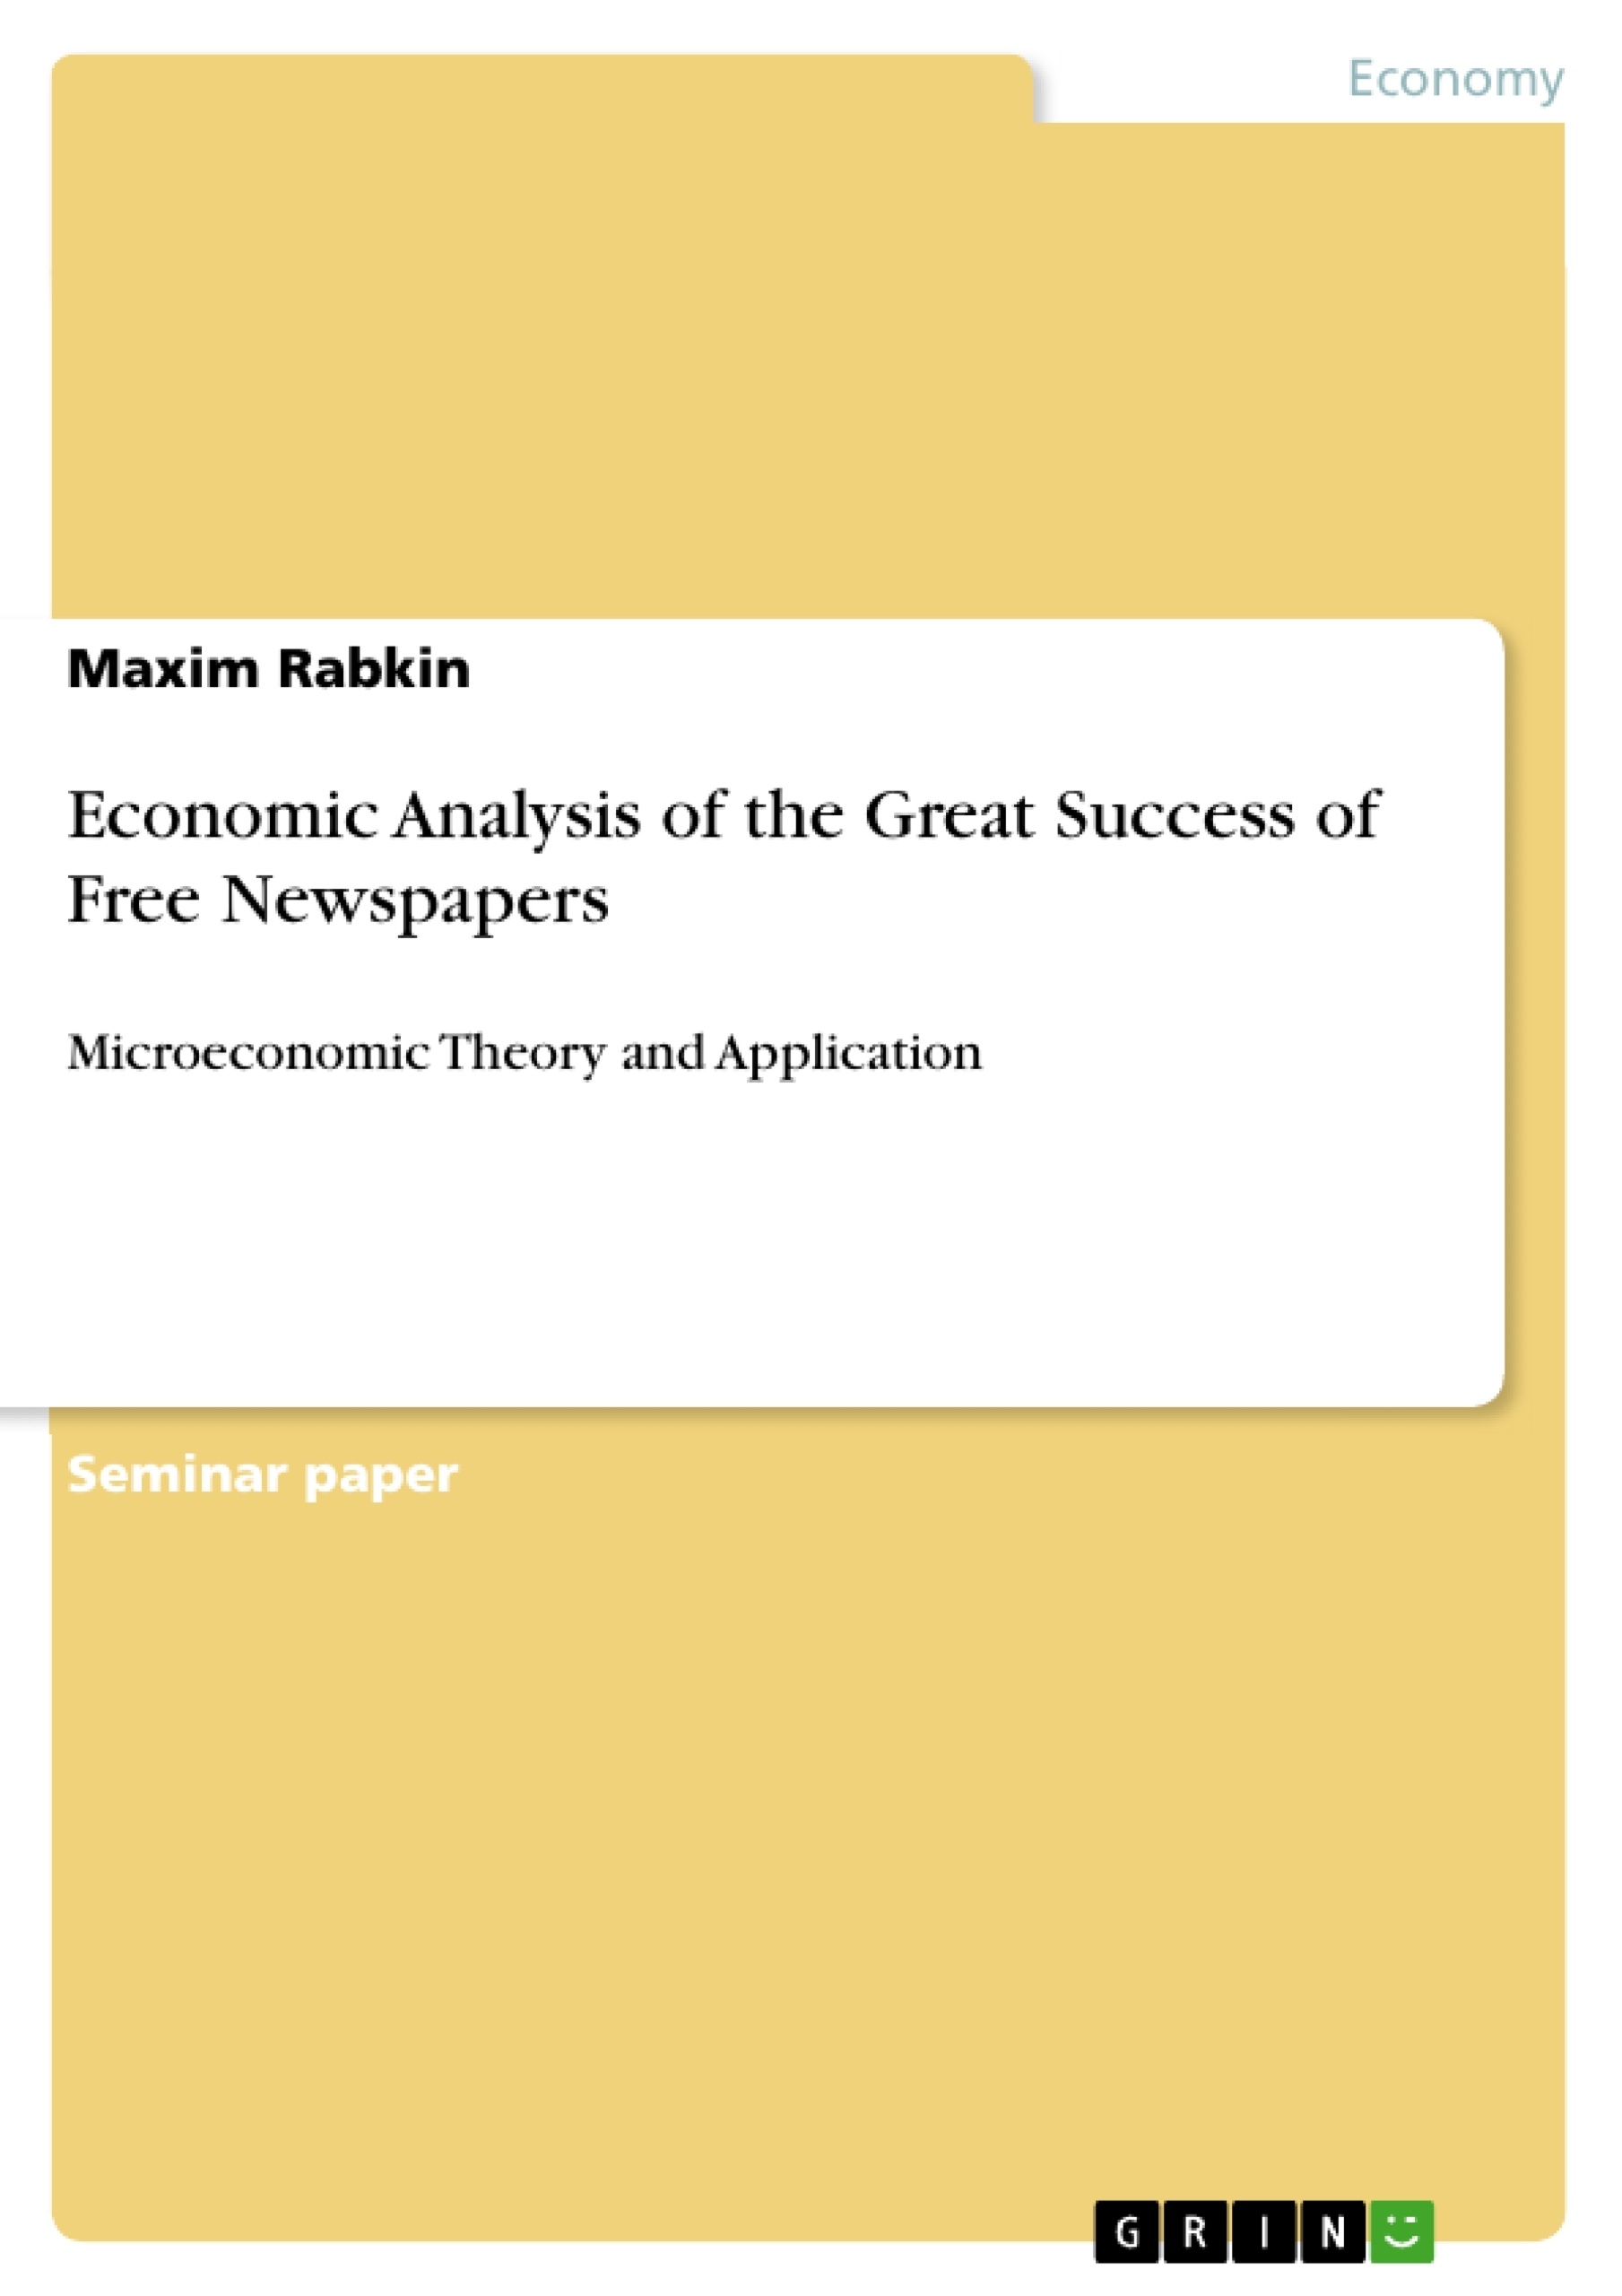 Title: Economic Analysis of the Great Success of Free Newspapers